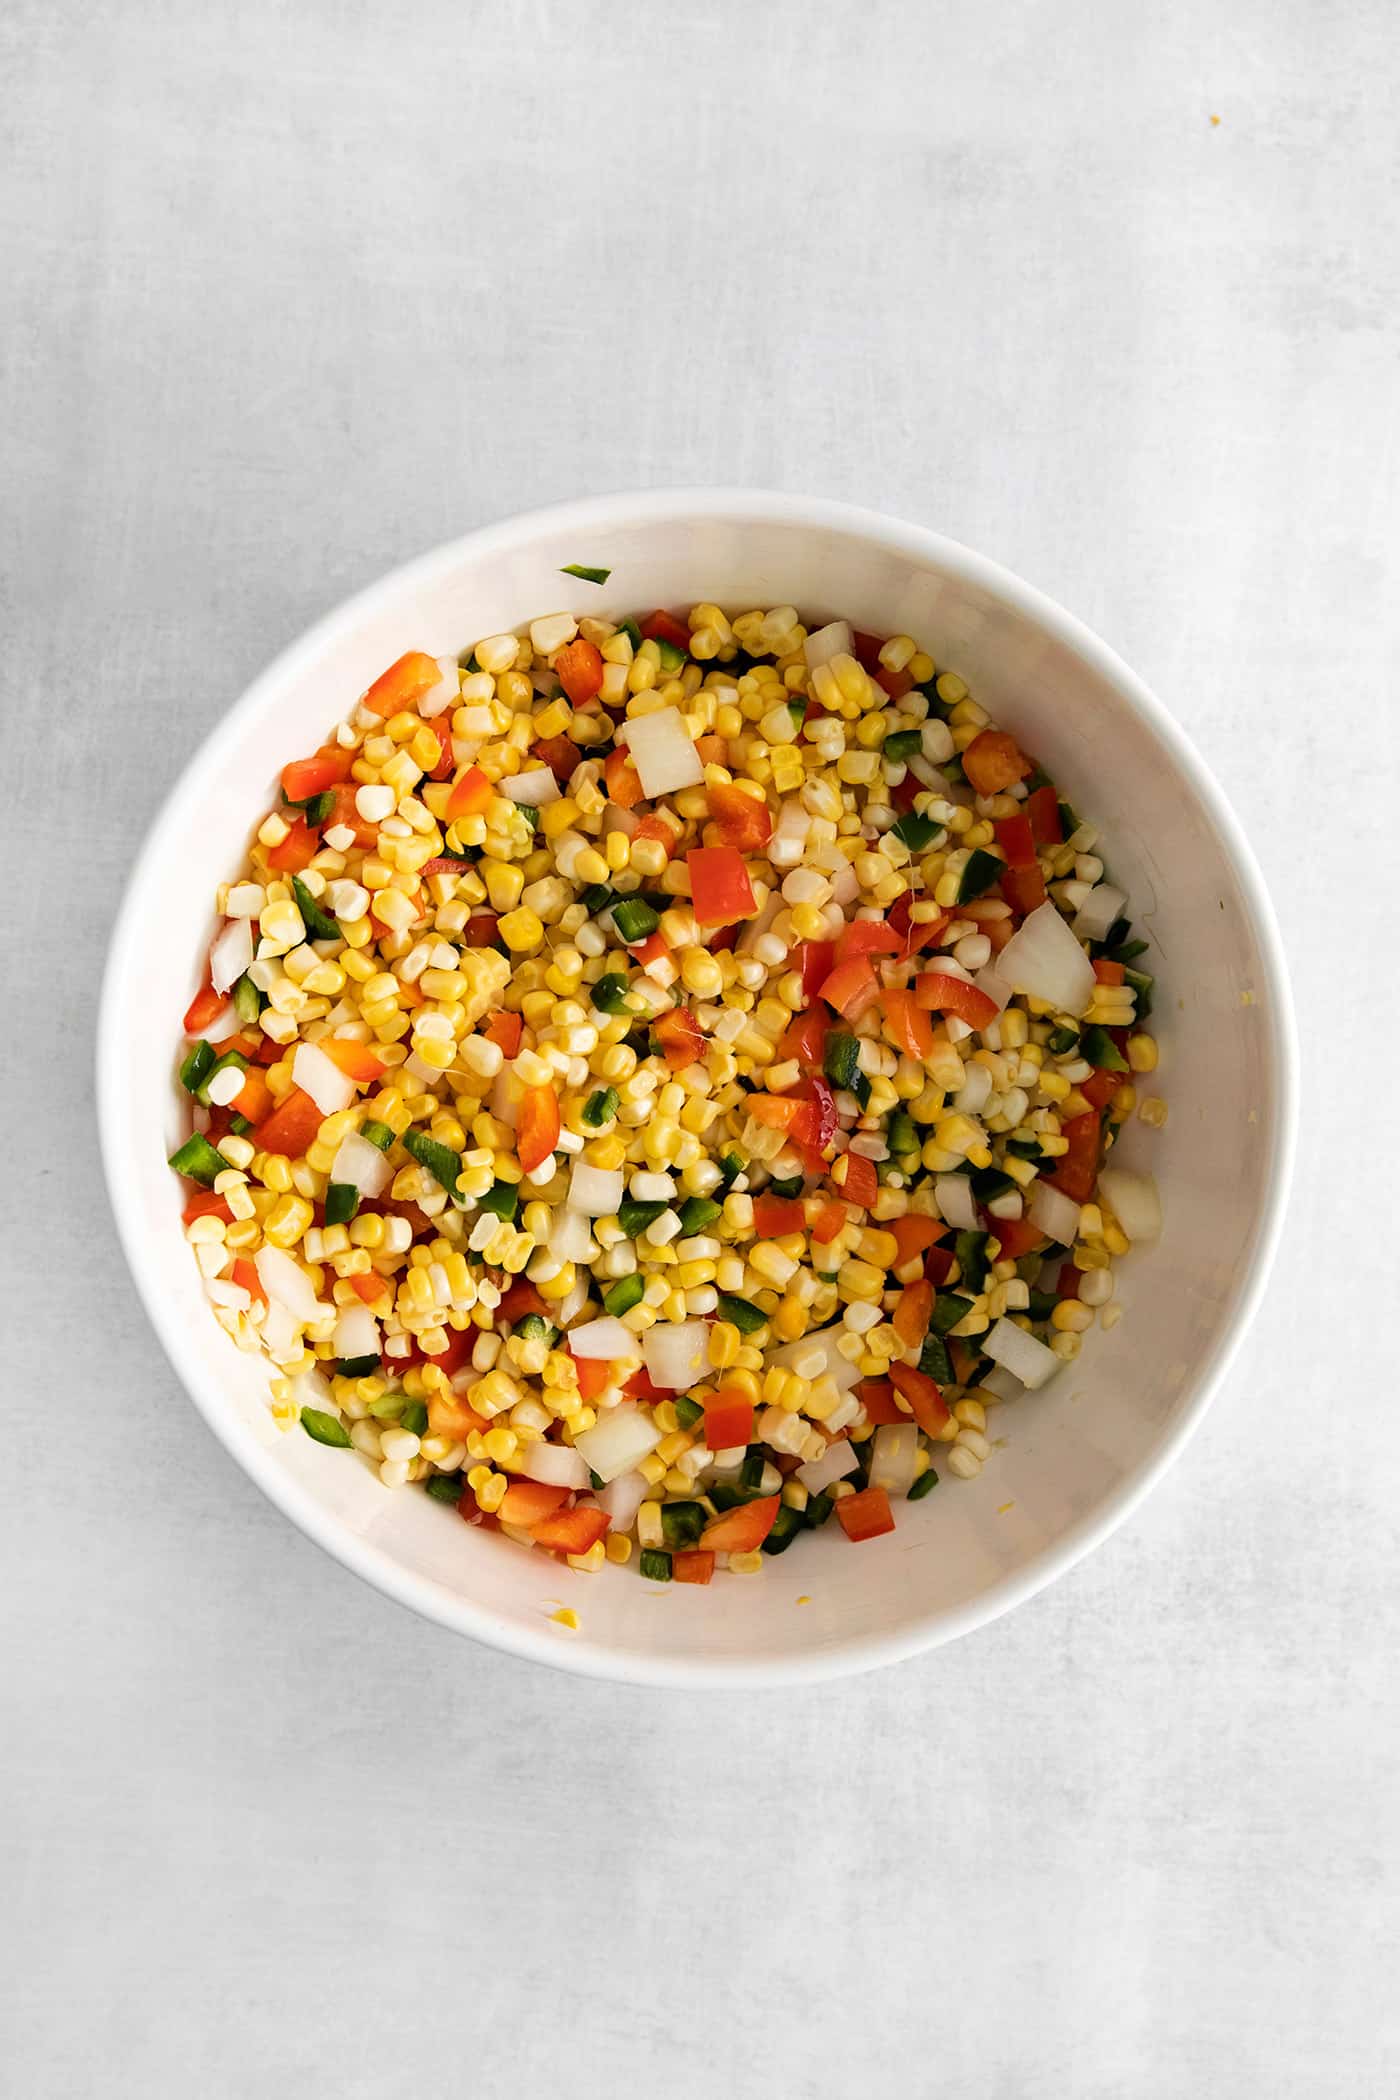 Corn, peppers, and onions mixed in a bowl